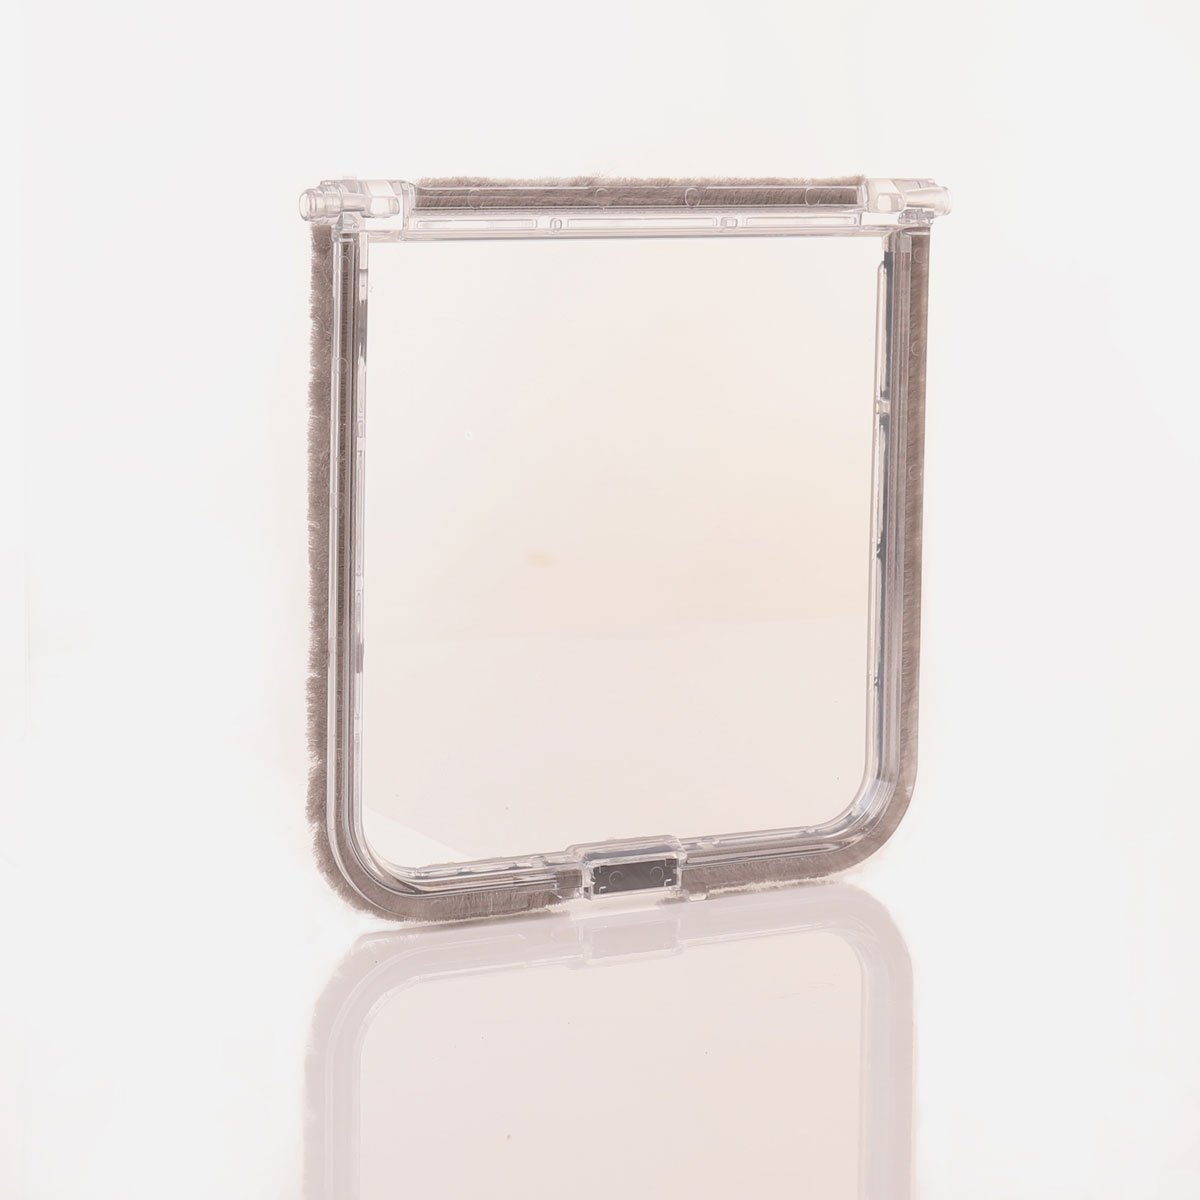 Replacement flap for a Cat mate Glass fitting door 210...</div>
					</div>
					
										
									  
					<div class=